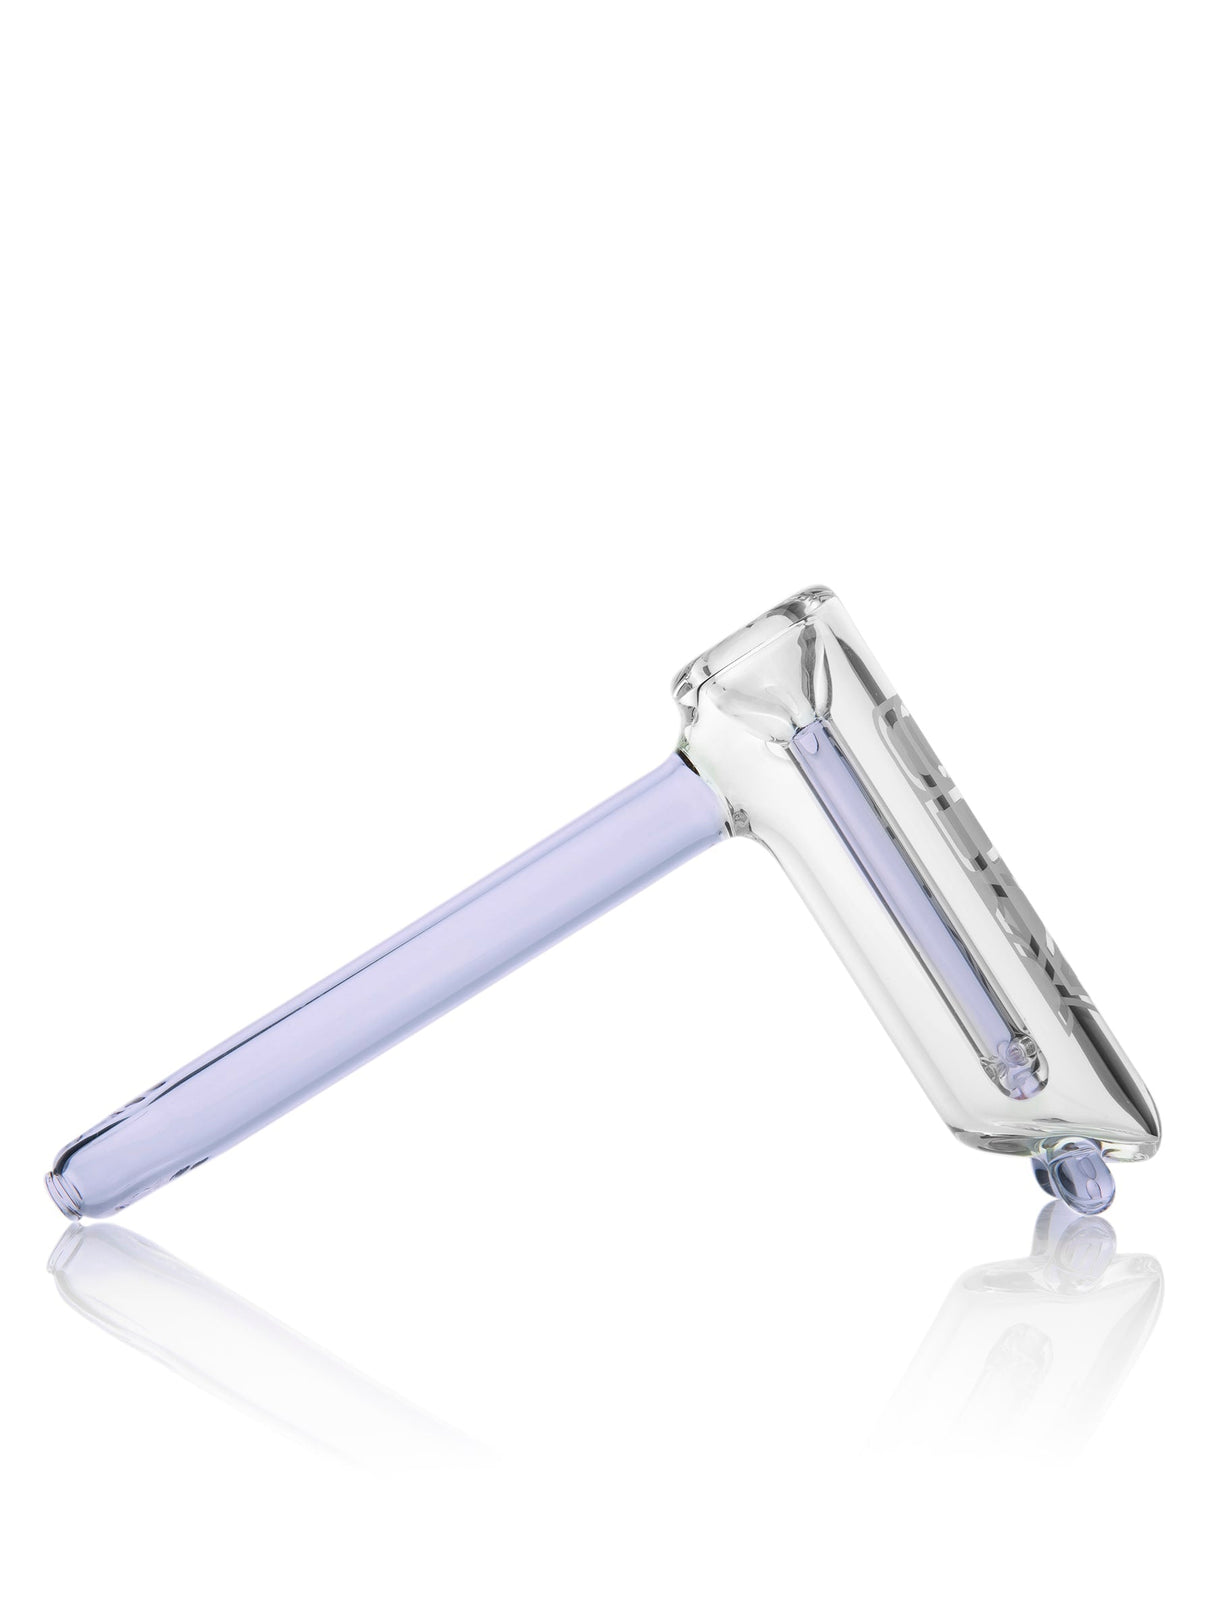 GRAV Hammer Style Bubbler with Colored Accents, Slitted Percolator, Side View on White